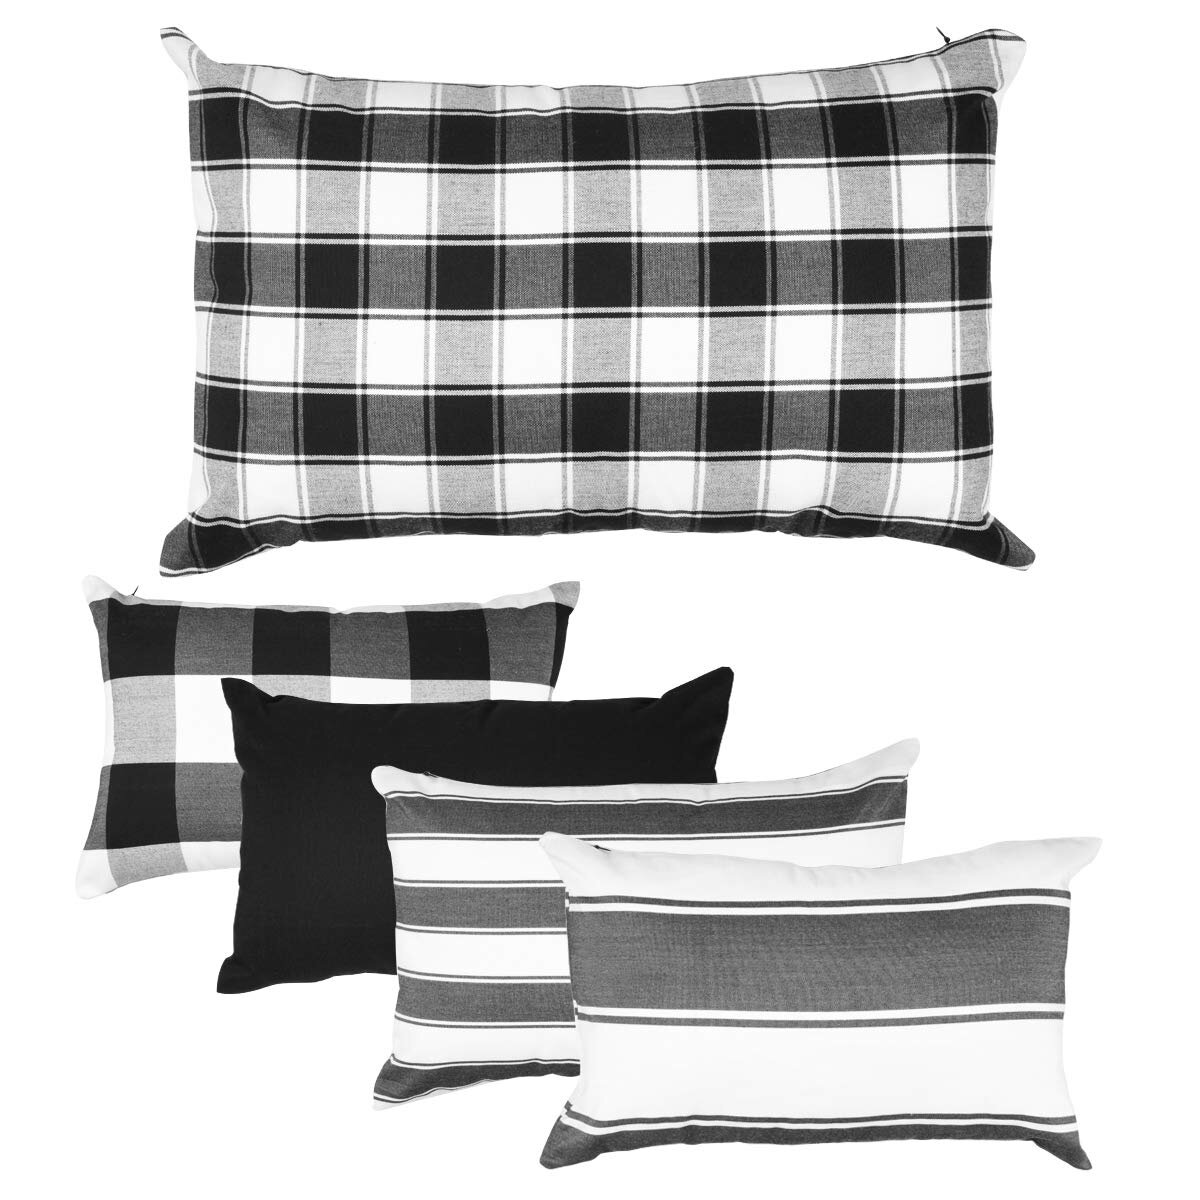 2 Pack Cool Stripe Check Pillow Cases Soft Linen Square Decorative Throw Cushion Cover Pillowcase with Hidden Zipper for Sofa 12  x 20  Gray Multi Color